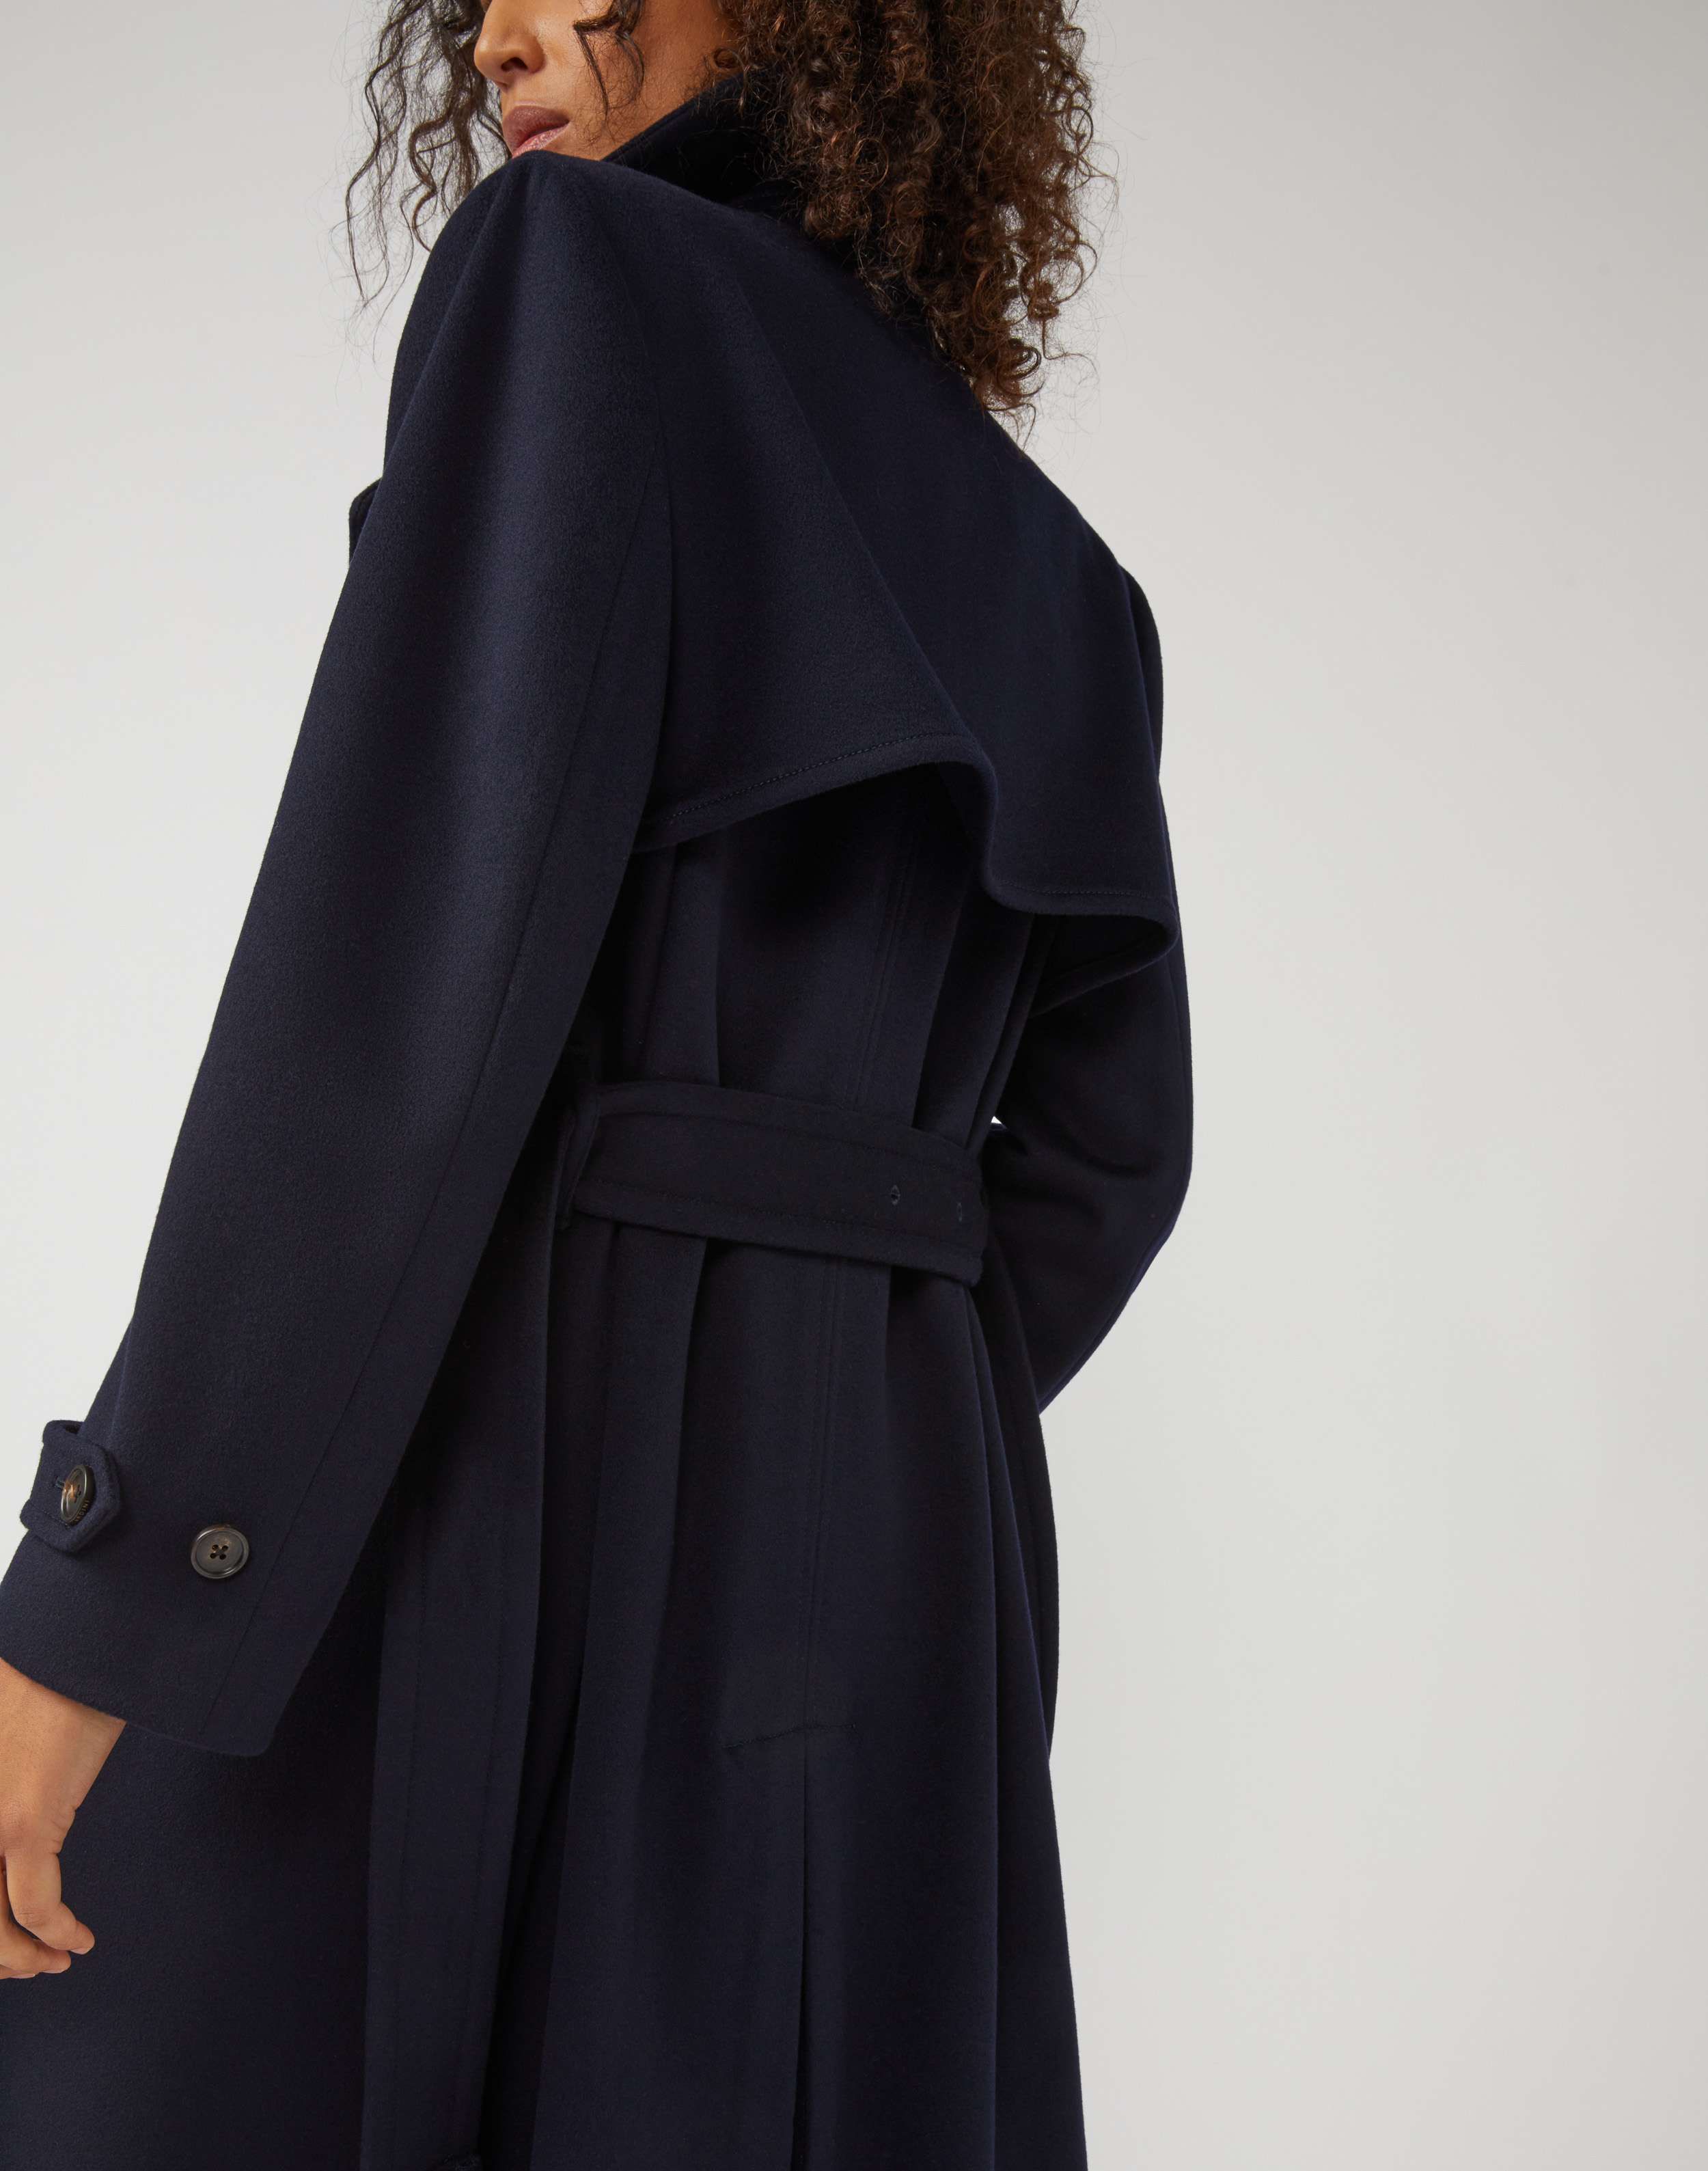 Belted trench coat in blue wool